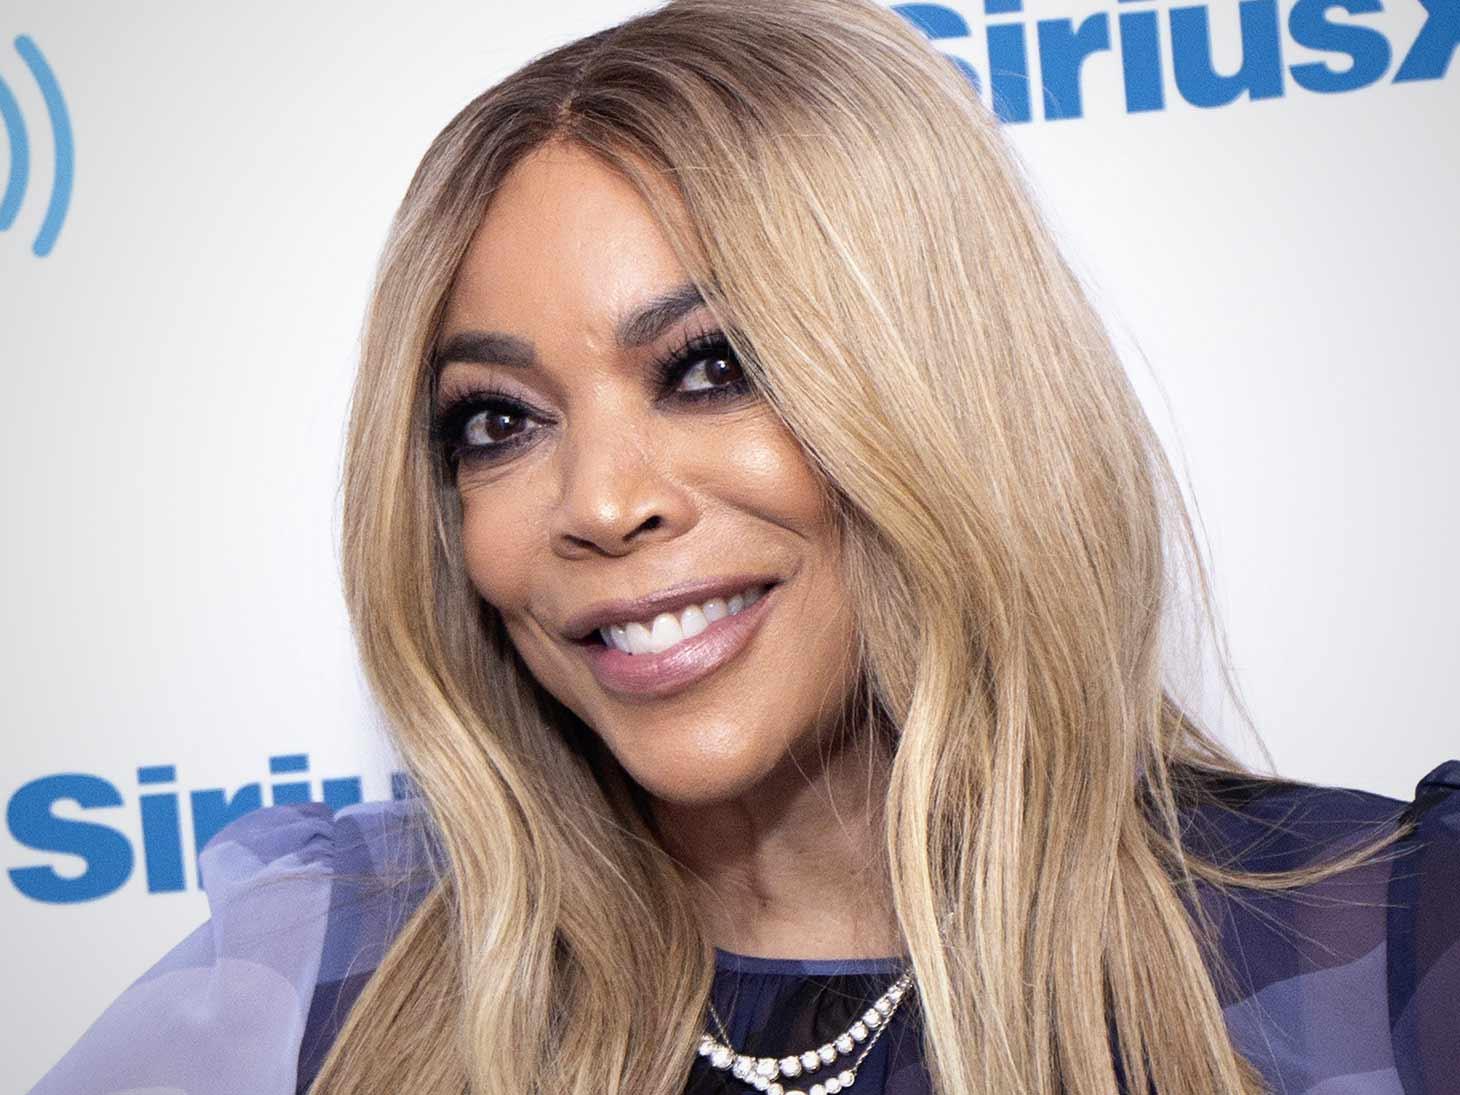 Wendy Williams Taking ‘Extended Break’ From Show Due to Complications From Graves’ Disease